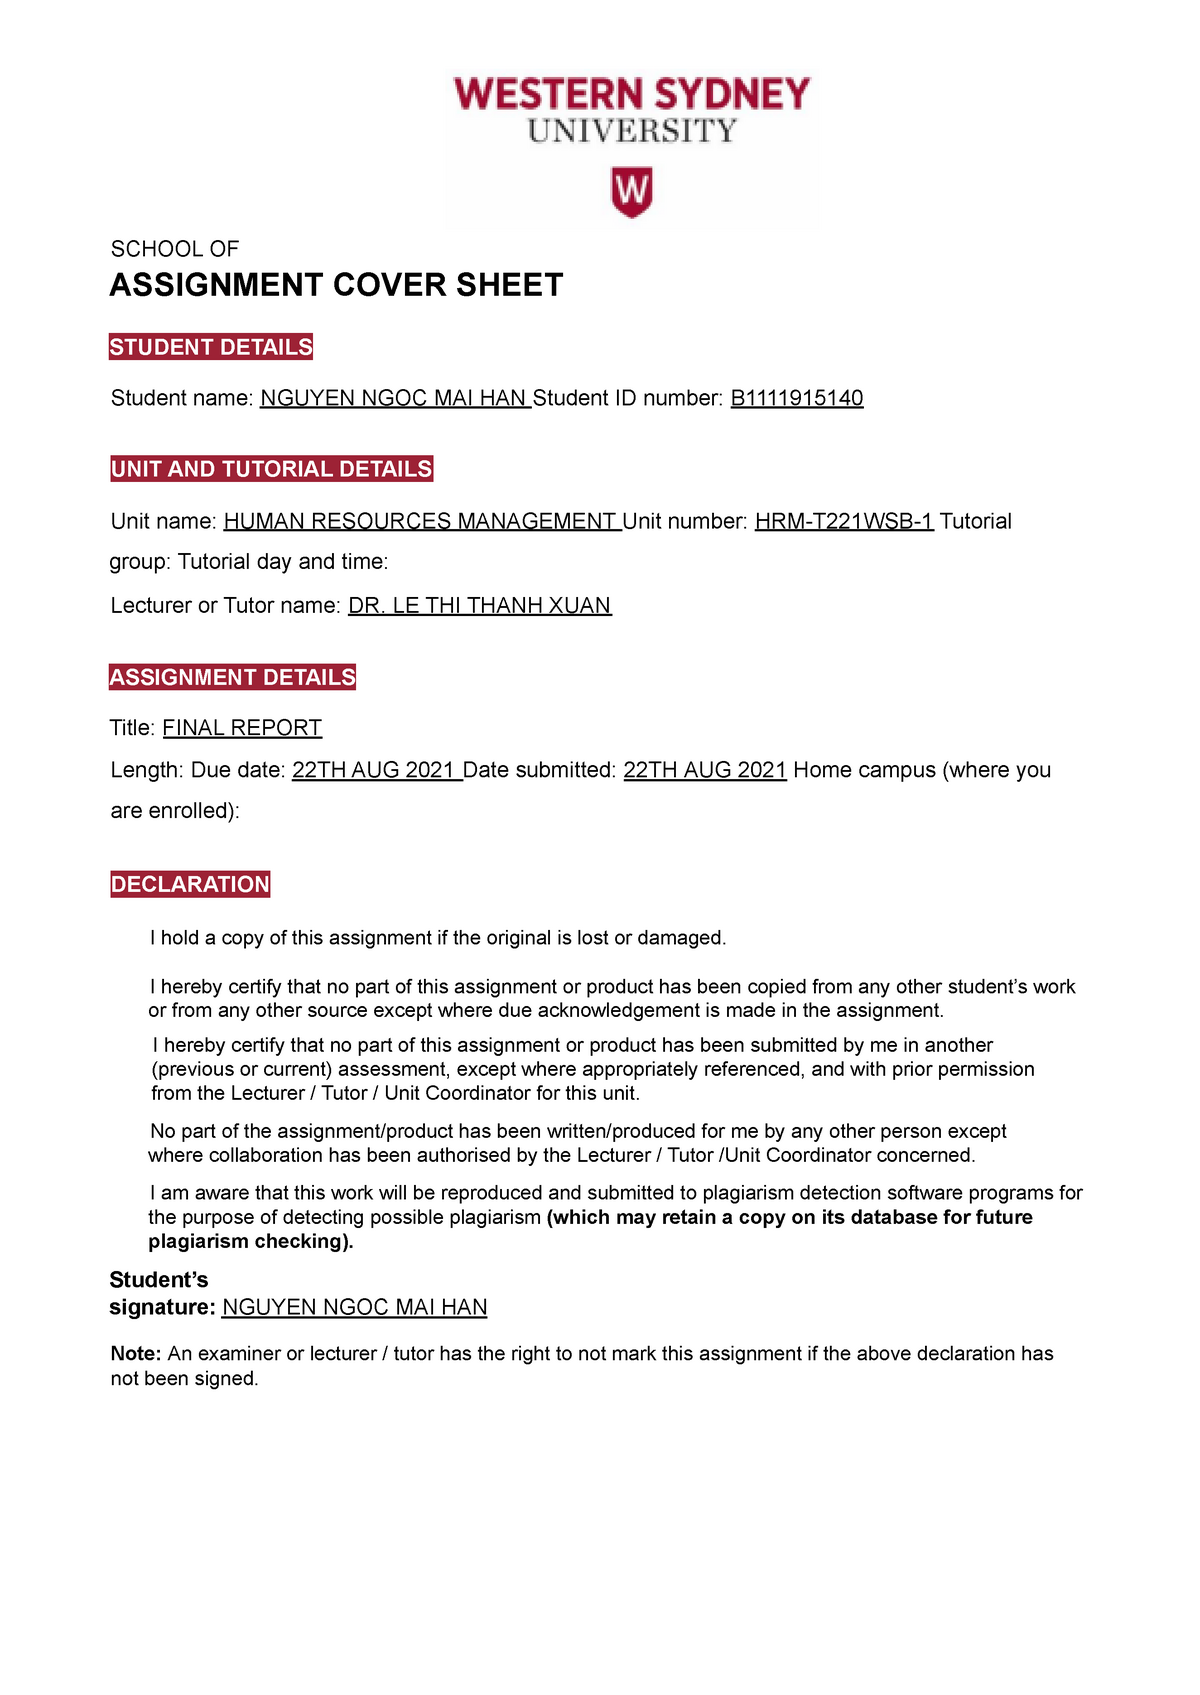 wsu individual assignment cover sheet